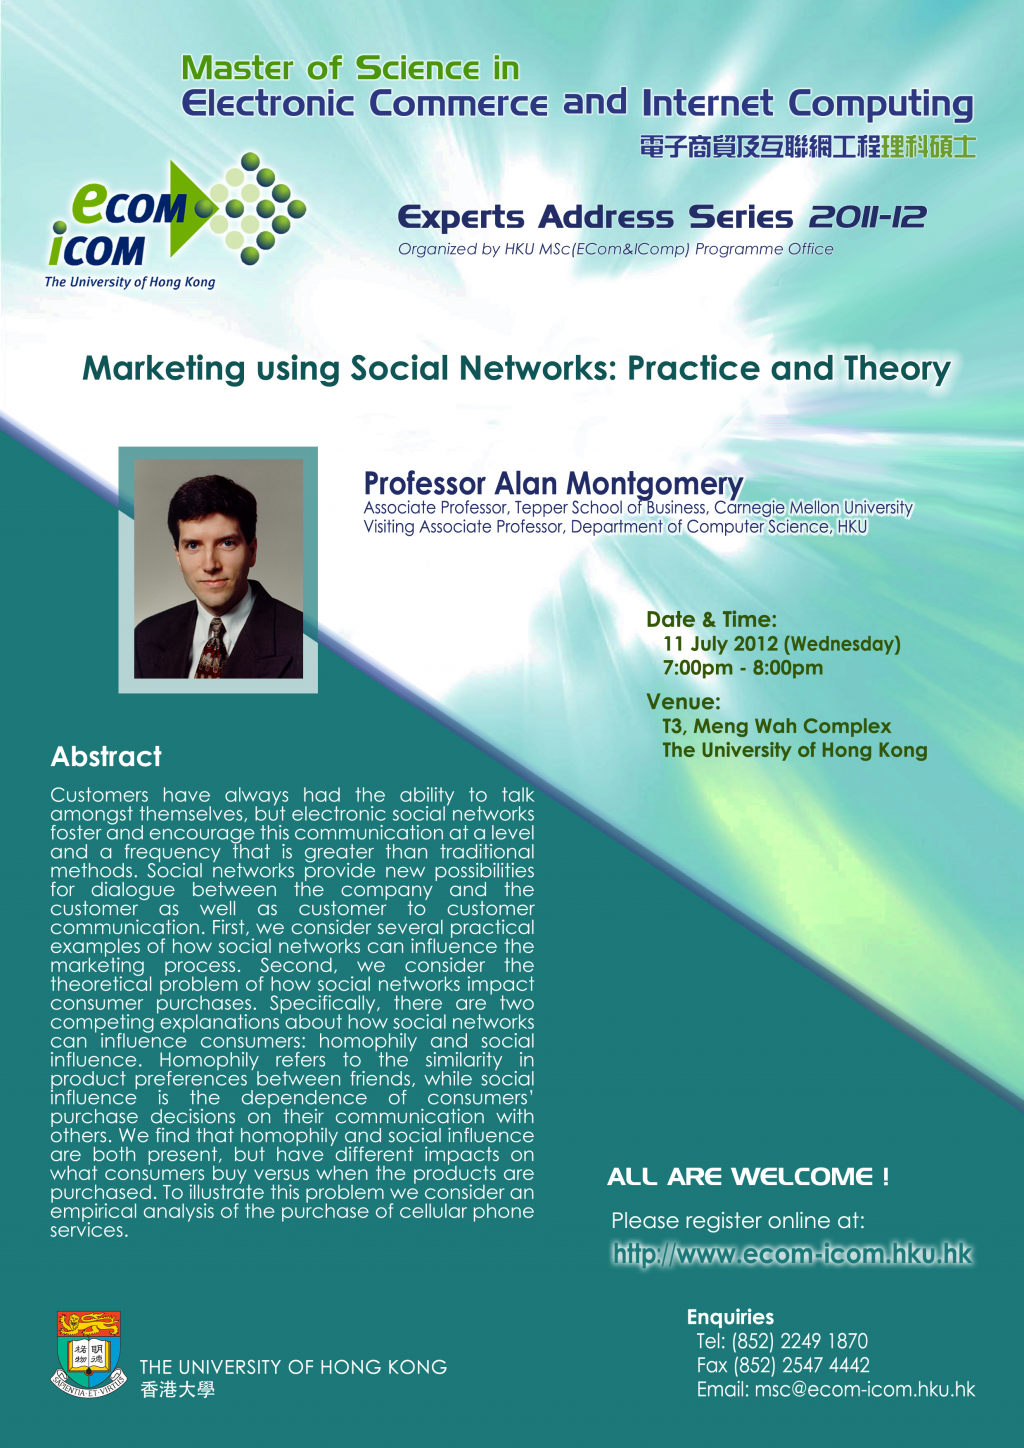 Marketing using Social Networks: Practice and Theory